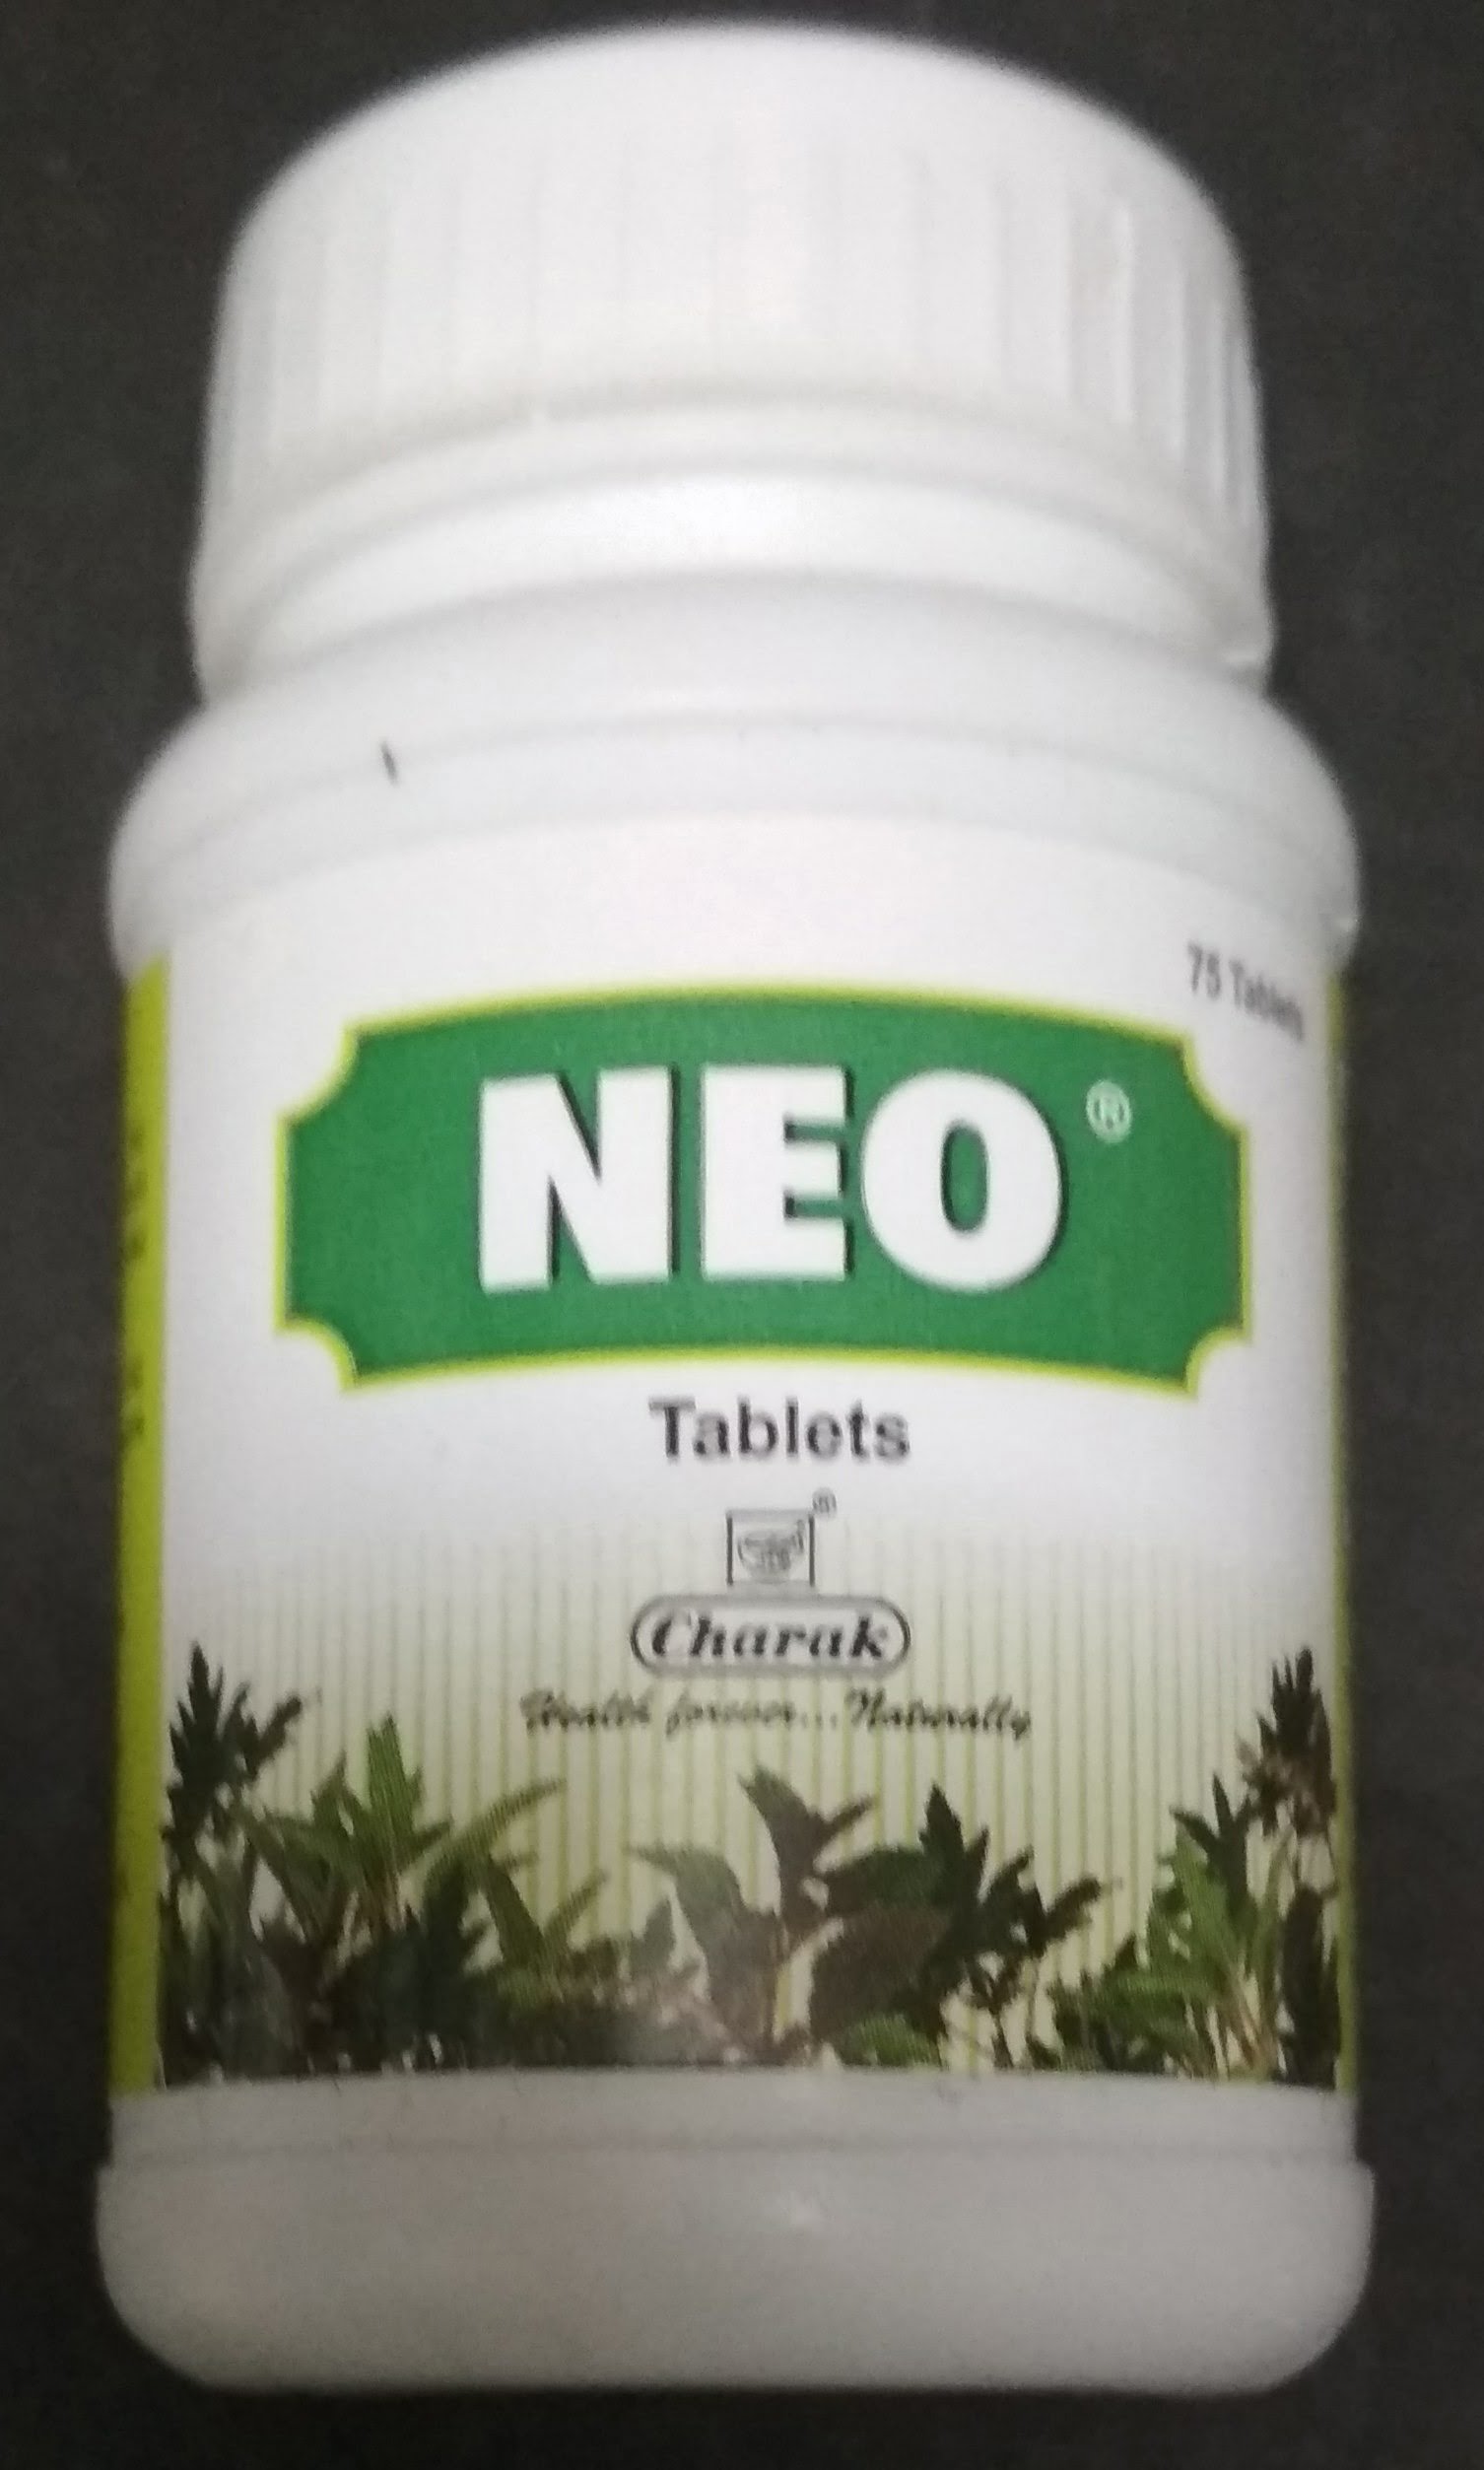 neo tab 75 tablets upto 15% off charak phytocare